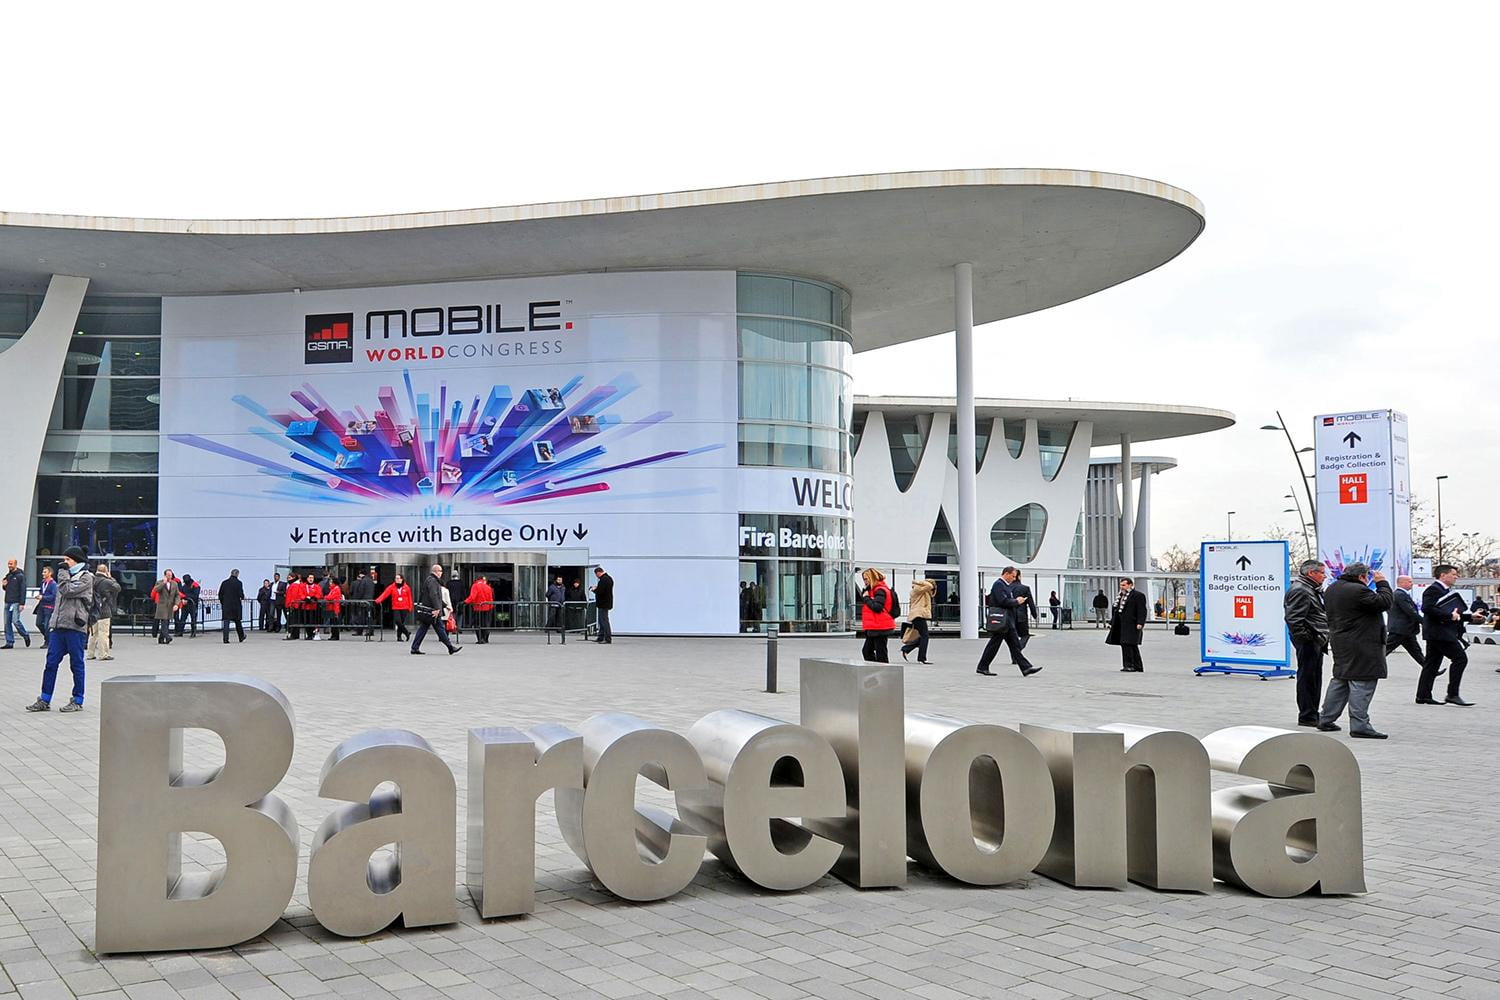 Barcelona again hosted the Mobile World Congress in 2019